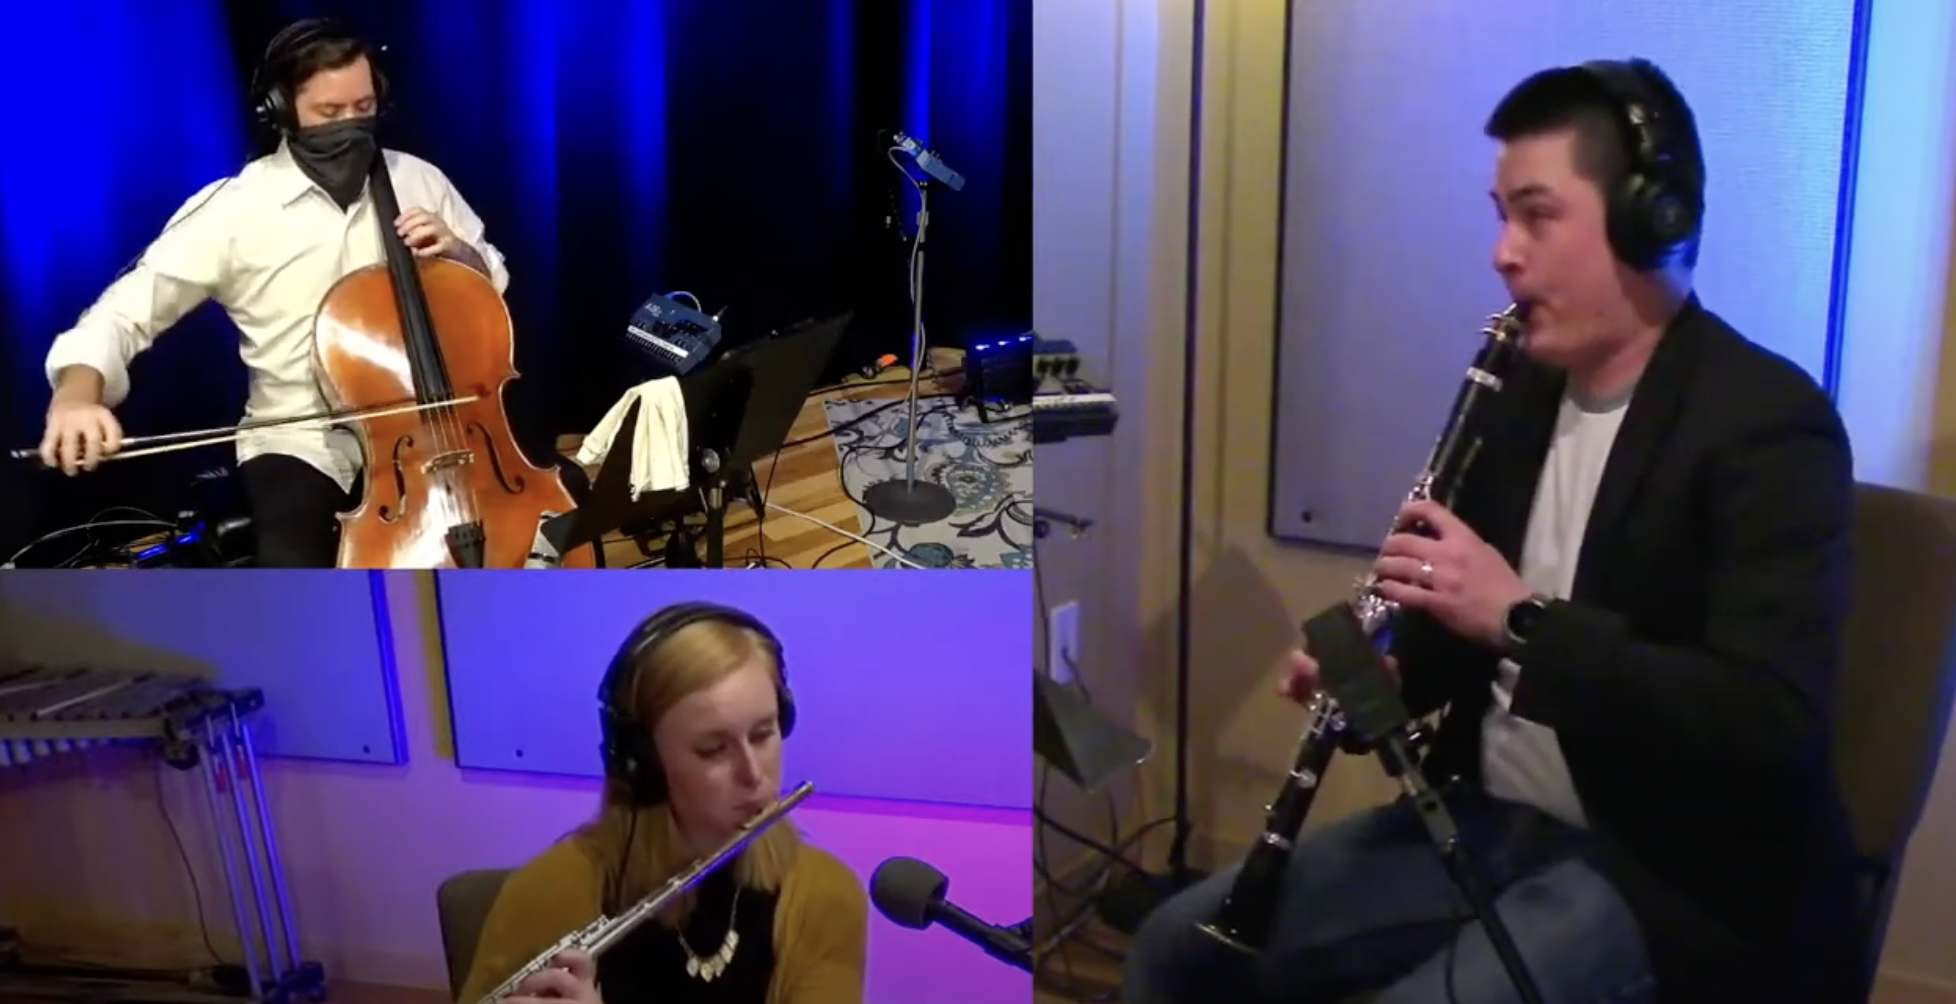 Nebula Ensemble performing Hiccup-pated Groove